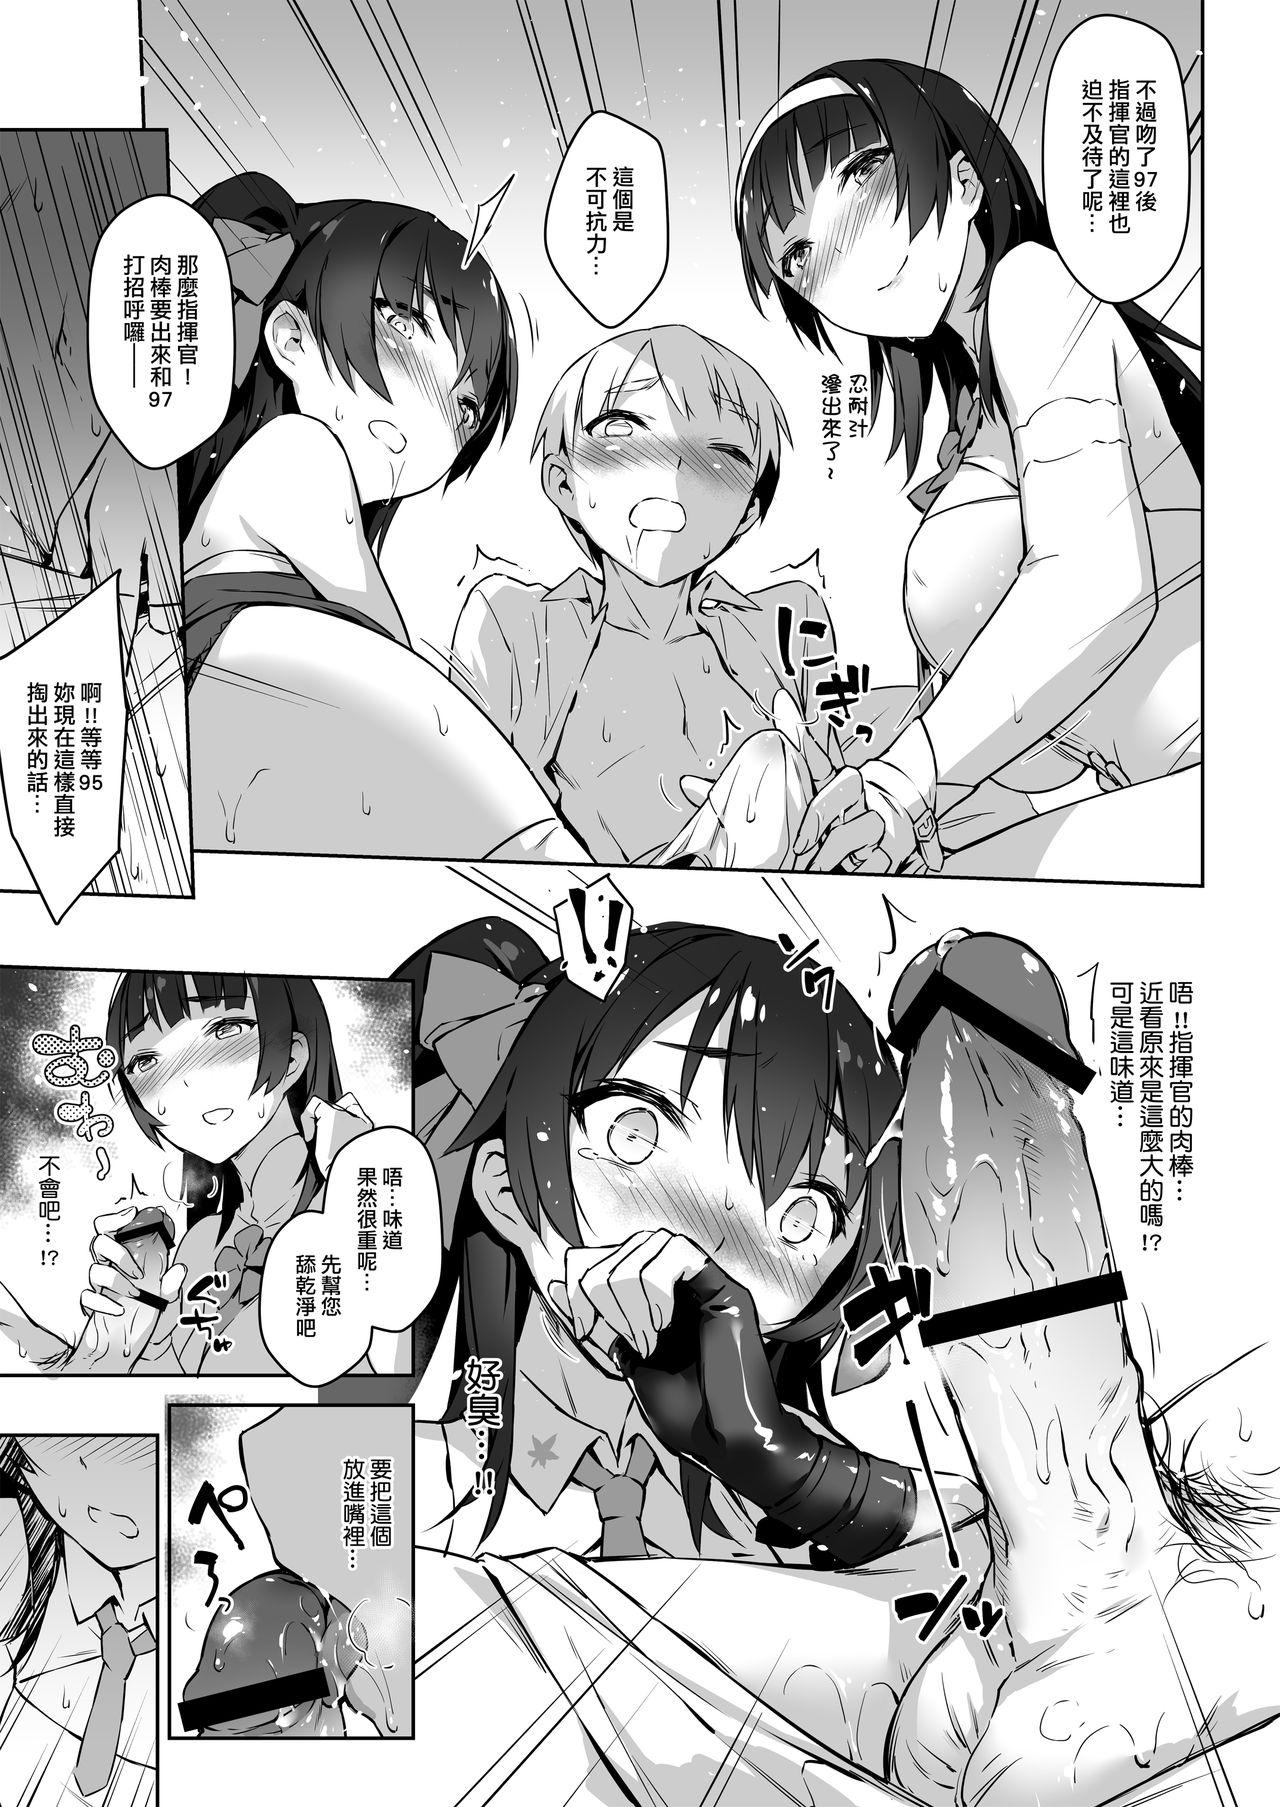 Office Fuck Type 95 Type 97, Let Sister Teaches You!! - Girls frontline Fuck Her Hard - Page 11